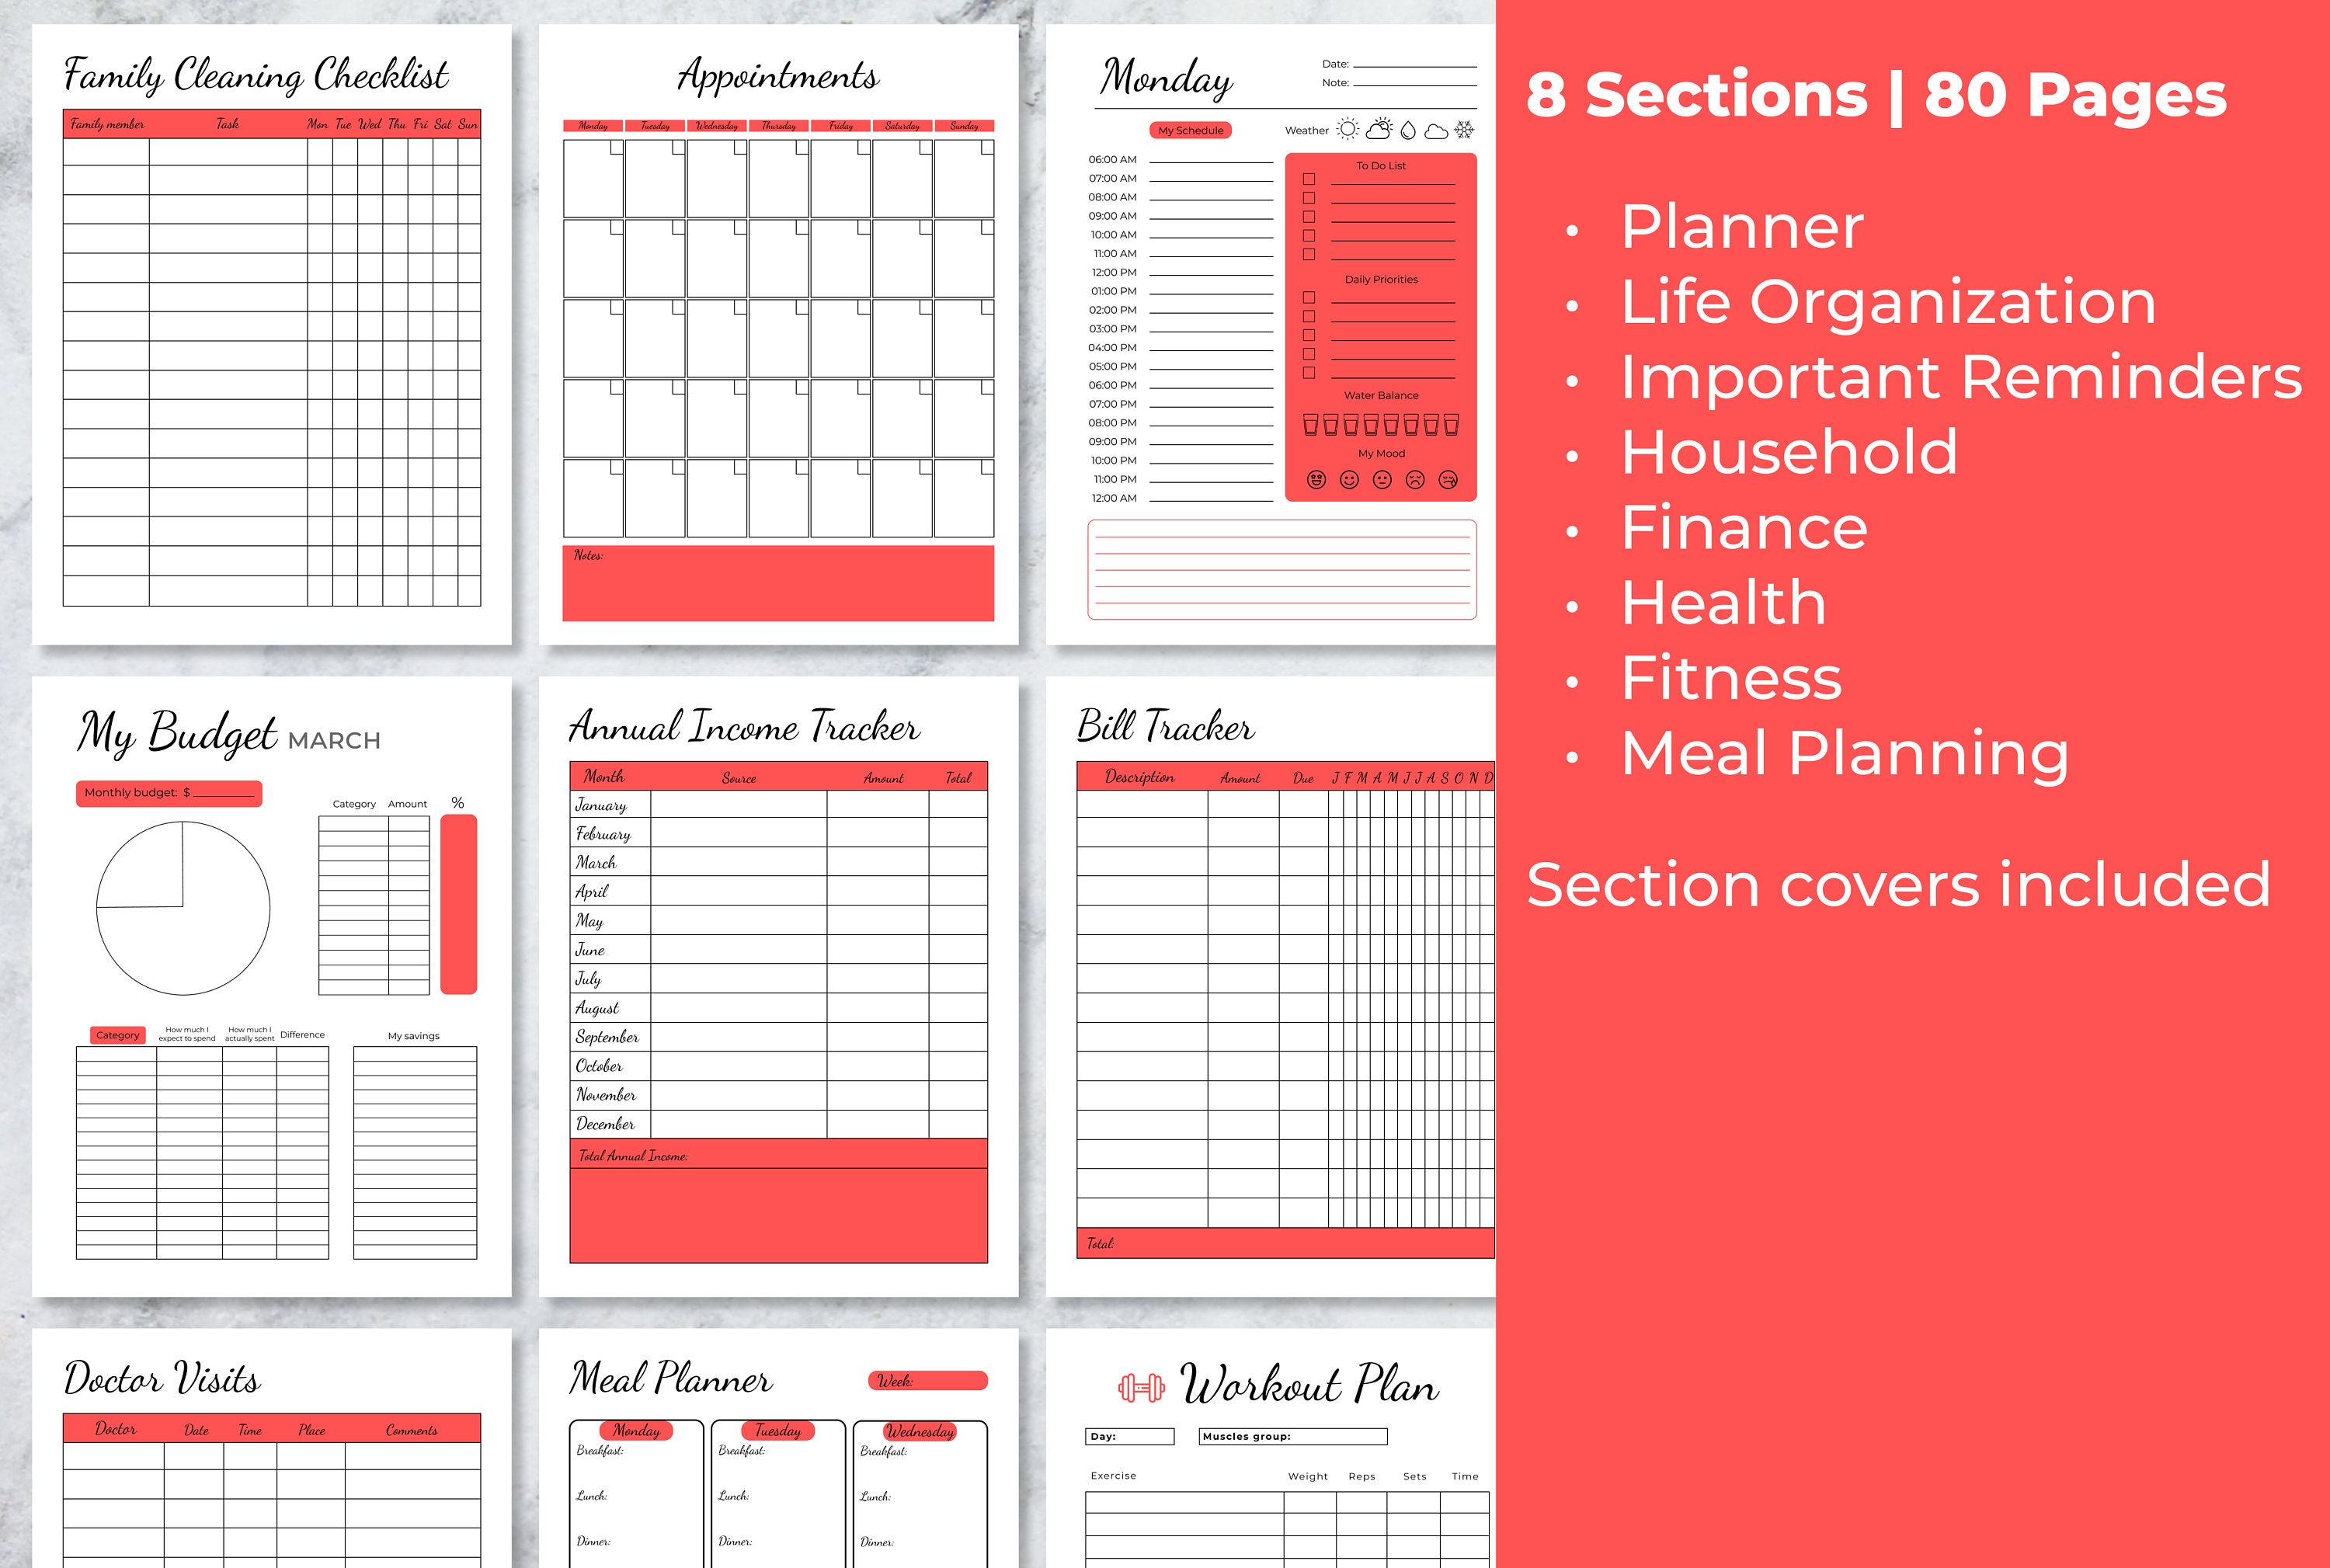 adhd-planner-adult-add-adhd-planner-bundle-for-adults-adhd-etsy